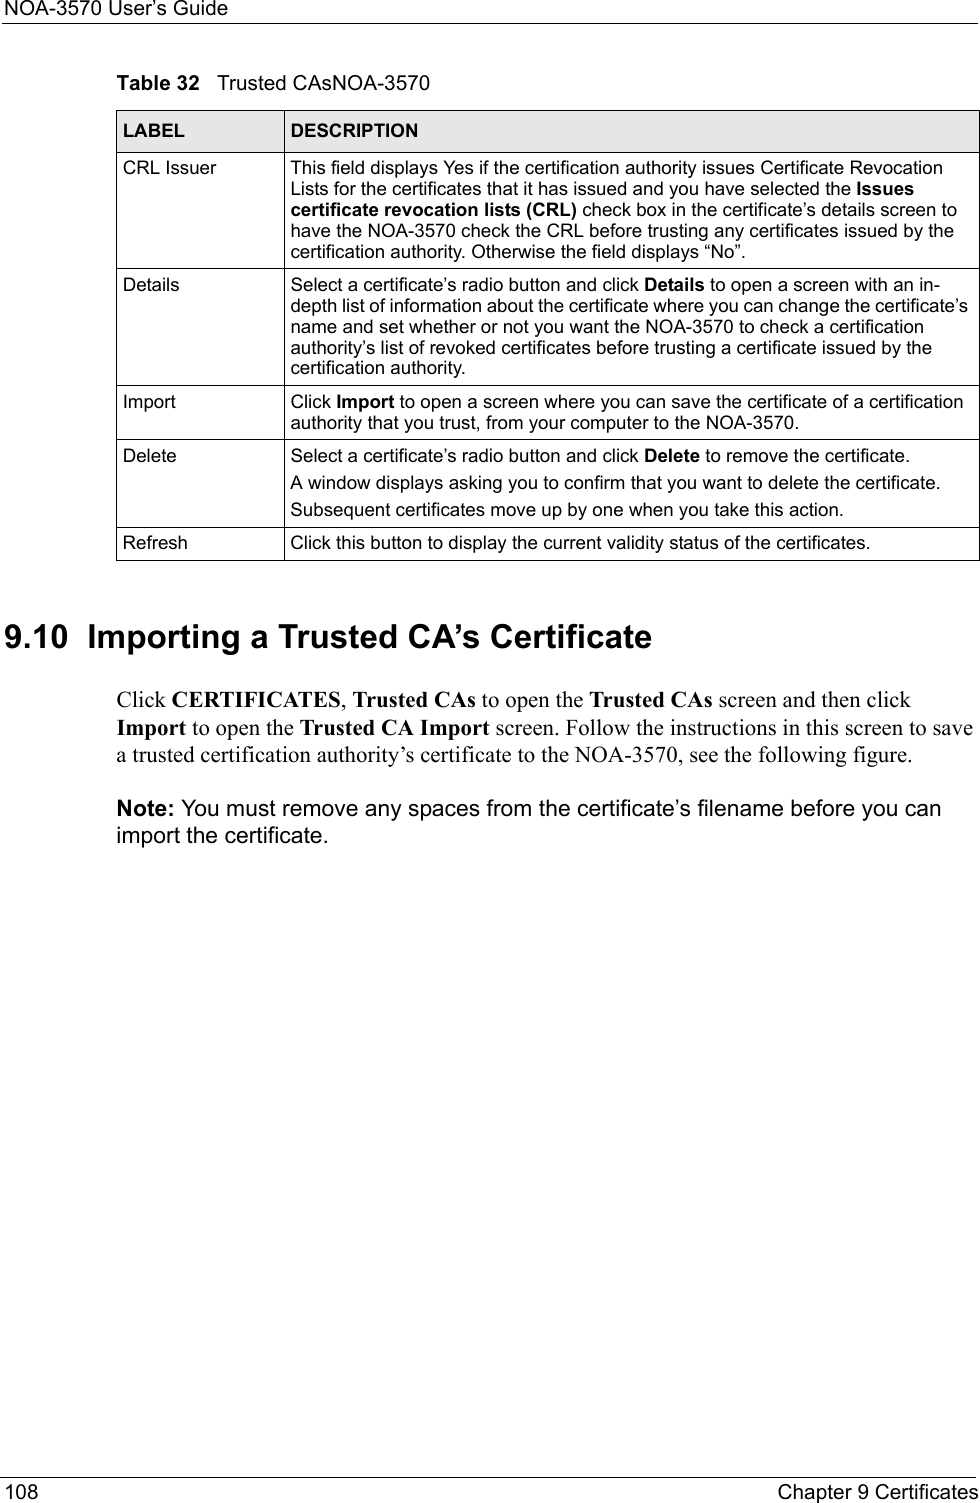 NOA-3570 User’s Guide108 Chapter 9 Certificates9.10  Importing a Trusted CA’s CertificateClick CERTIFICATES, Trusted CAs to open the Trusted CAs screen and then click Import to open the Trusted CA Import screen. Follow the instructions in this screen to save a trusted certification authority’s certificate to the NOA-3570, see the following figure.Note: You must remove any spaces from the certificate’s filename before you can import the certificate.CRL Issuer This field displays Yes if the certification authority issues Certificate Revocation Lists for the certificates that it has issued and you have selected the Issues certificate revocation lists (CRL) check box in the certificate’s details screen to have the NOA-3570 check the CRL before trusting any certificates issued by the certification authority. Otherwise the field displays “No”.Details Select a certificate’s radio button and click Details to open a screen with an in-depth list of information about the certificate where you can change the certificate’s name and set whether or not you want the NOA-3570 to check a certification authority’s list of revoked certificates before trusting a certificate issued by the certification authority.Import Click Import to open a screen where you can save the certificate of a certification authority that you trust, from your computer to the NOA-3570.Delete Select a certificate’s radio button and click Delete to remove the certificate.A window displays asking you to confirm that you want to delete the certificate.Subsequent certificates move up by one when you take this action.Refresh Click this button to display the current validity status of the certificates.Table 32   Trusted CAsNOA-3570LABEL DESCRIPTION